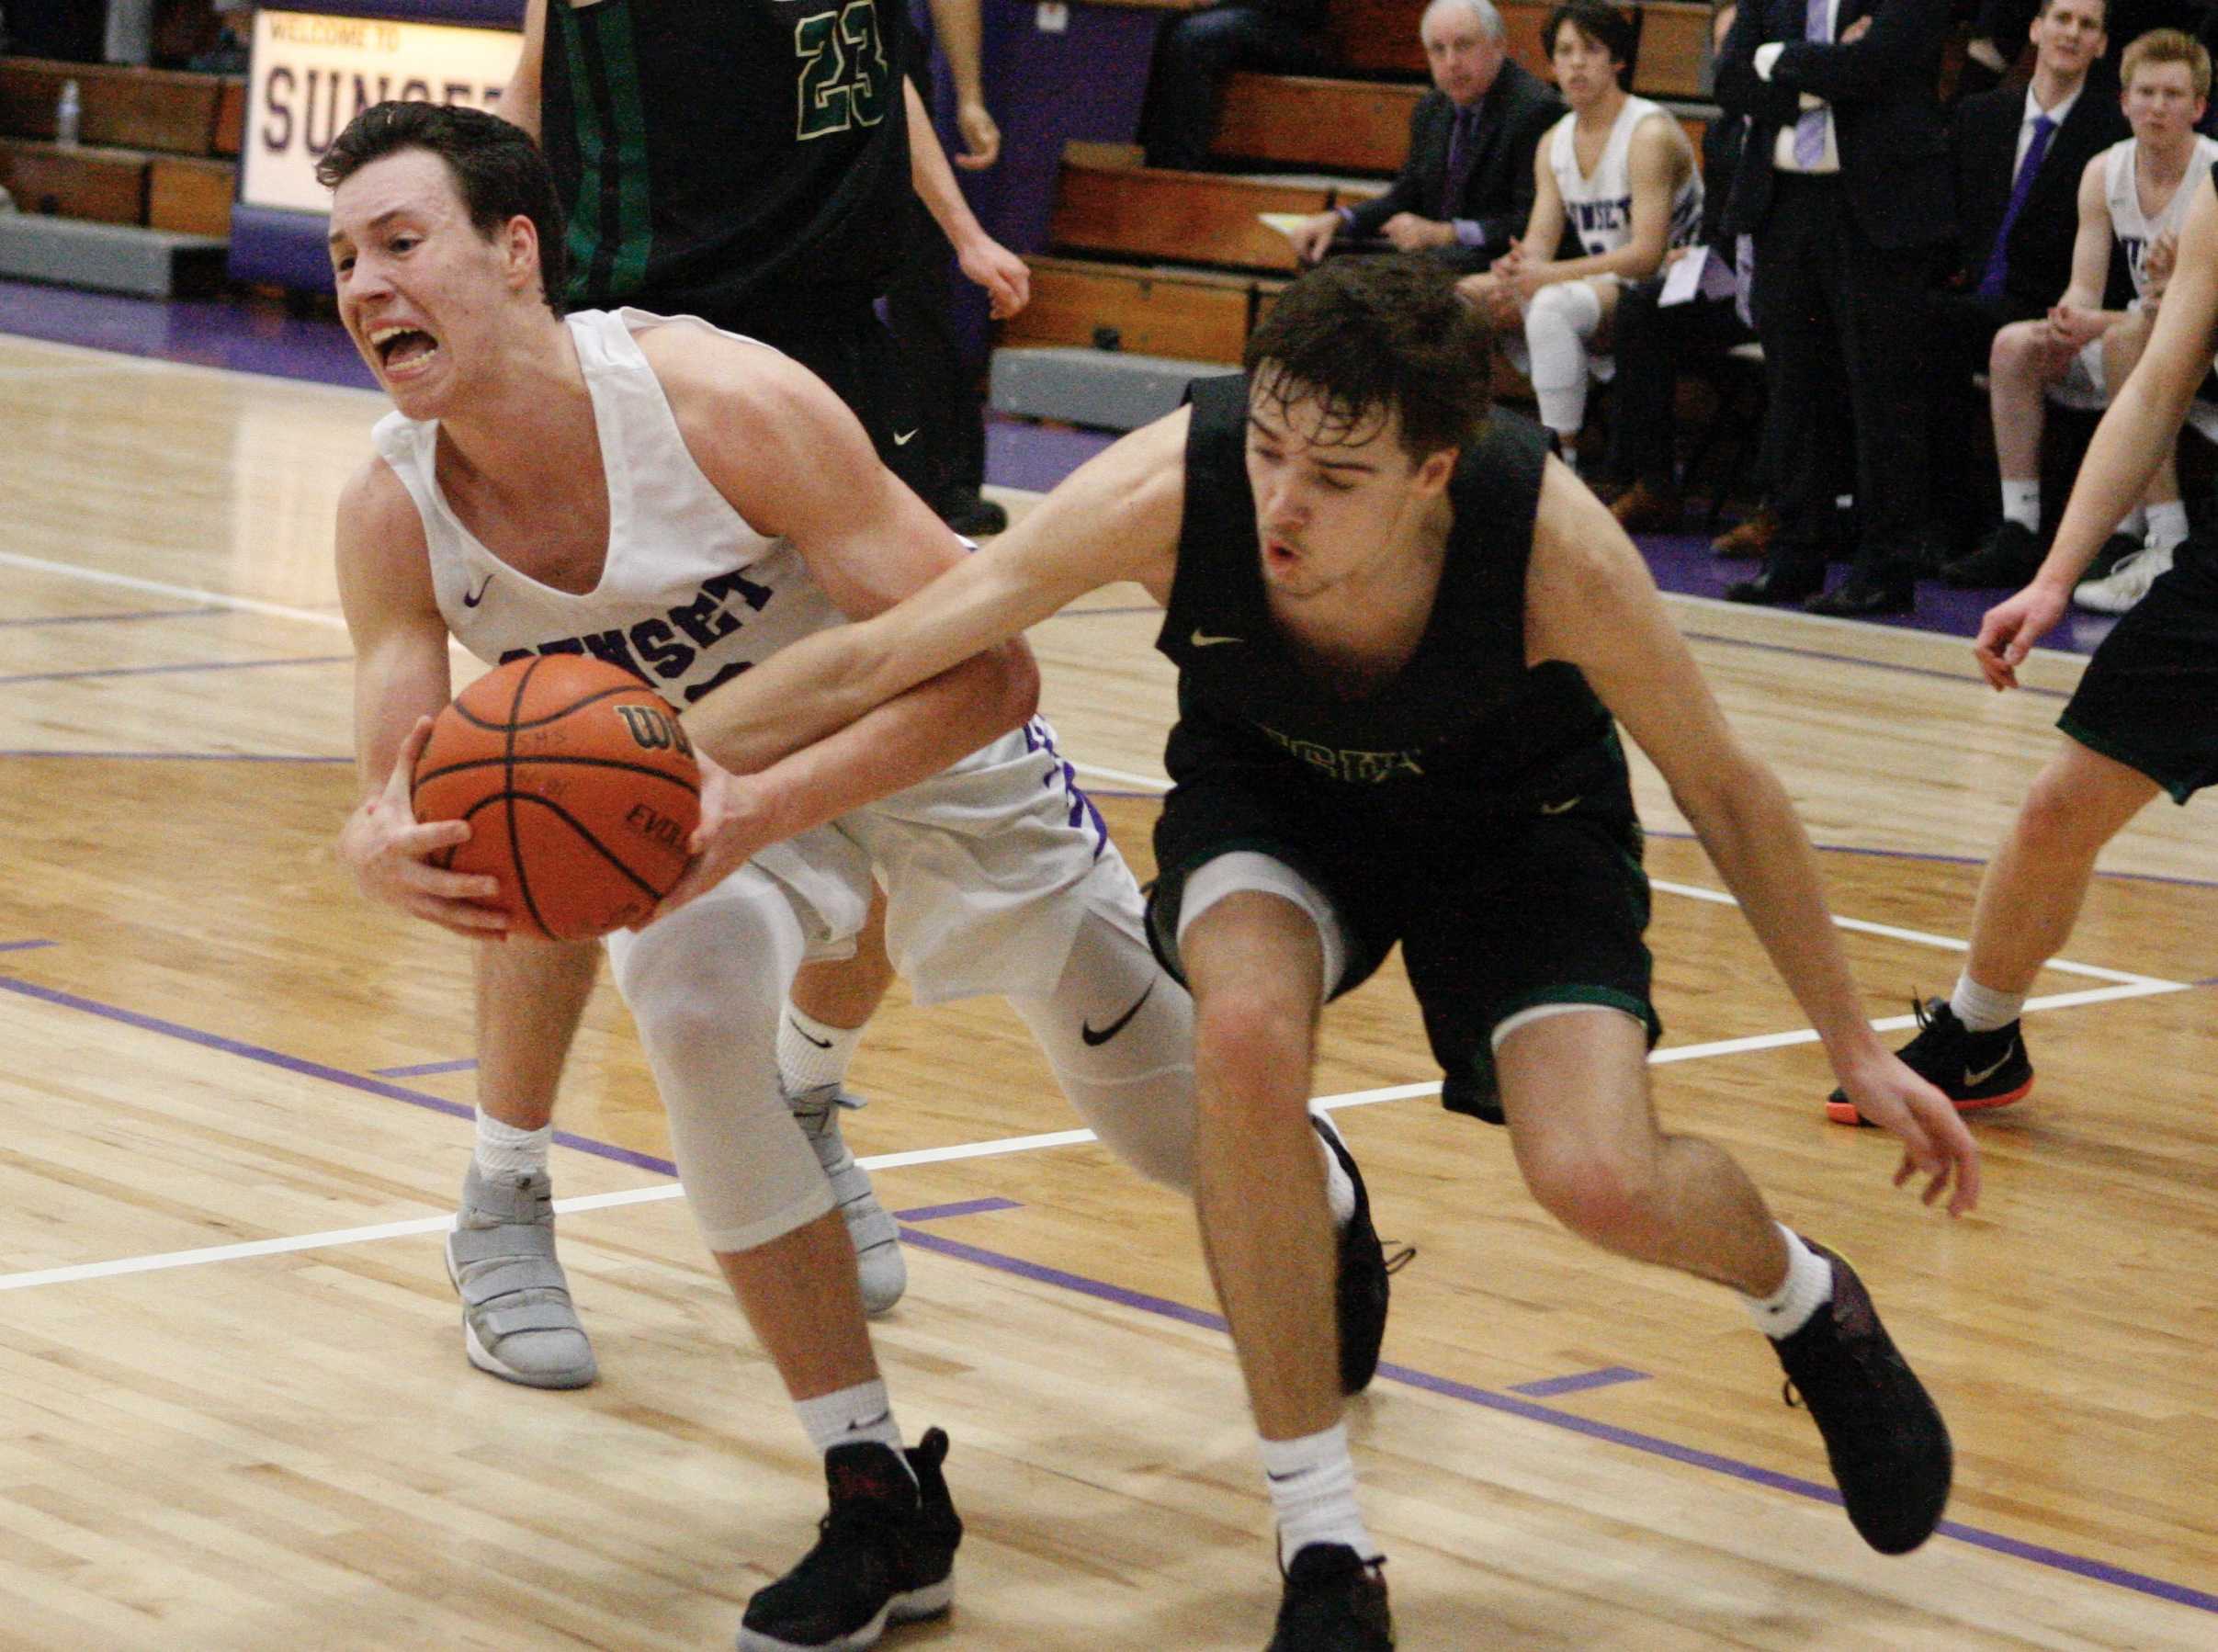 Sunset's Colby King wrestles the ball away from Jesuit's Justin Bieker in the third quarter of Apollos' 89-84 victory.